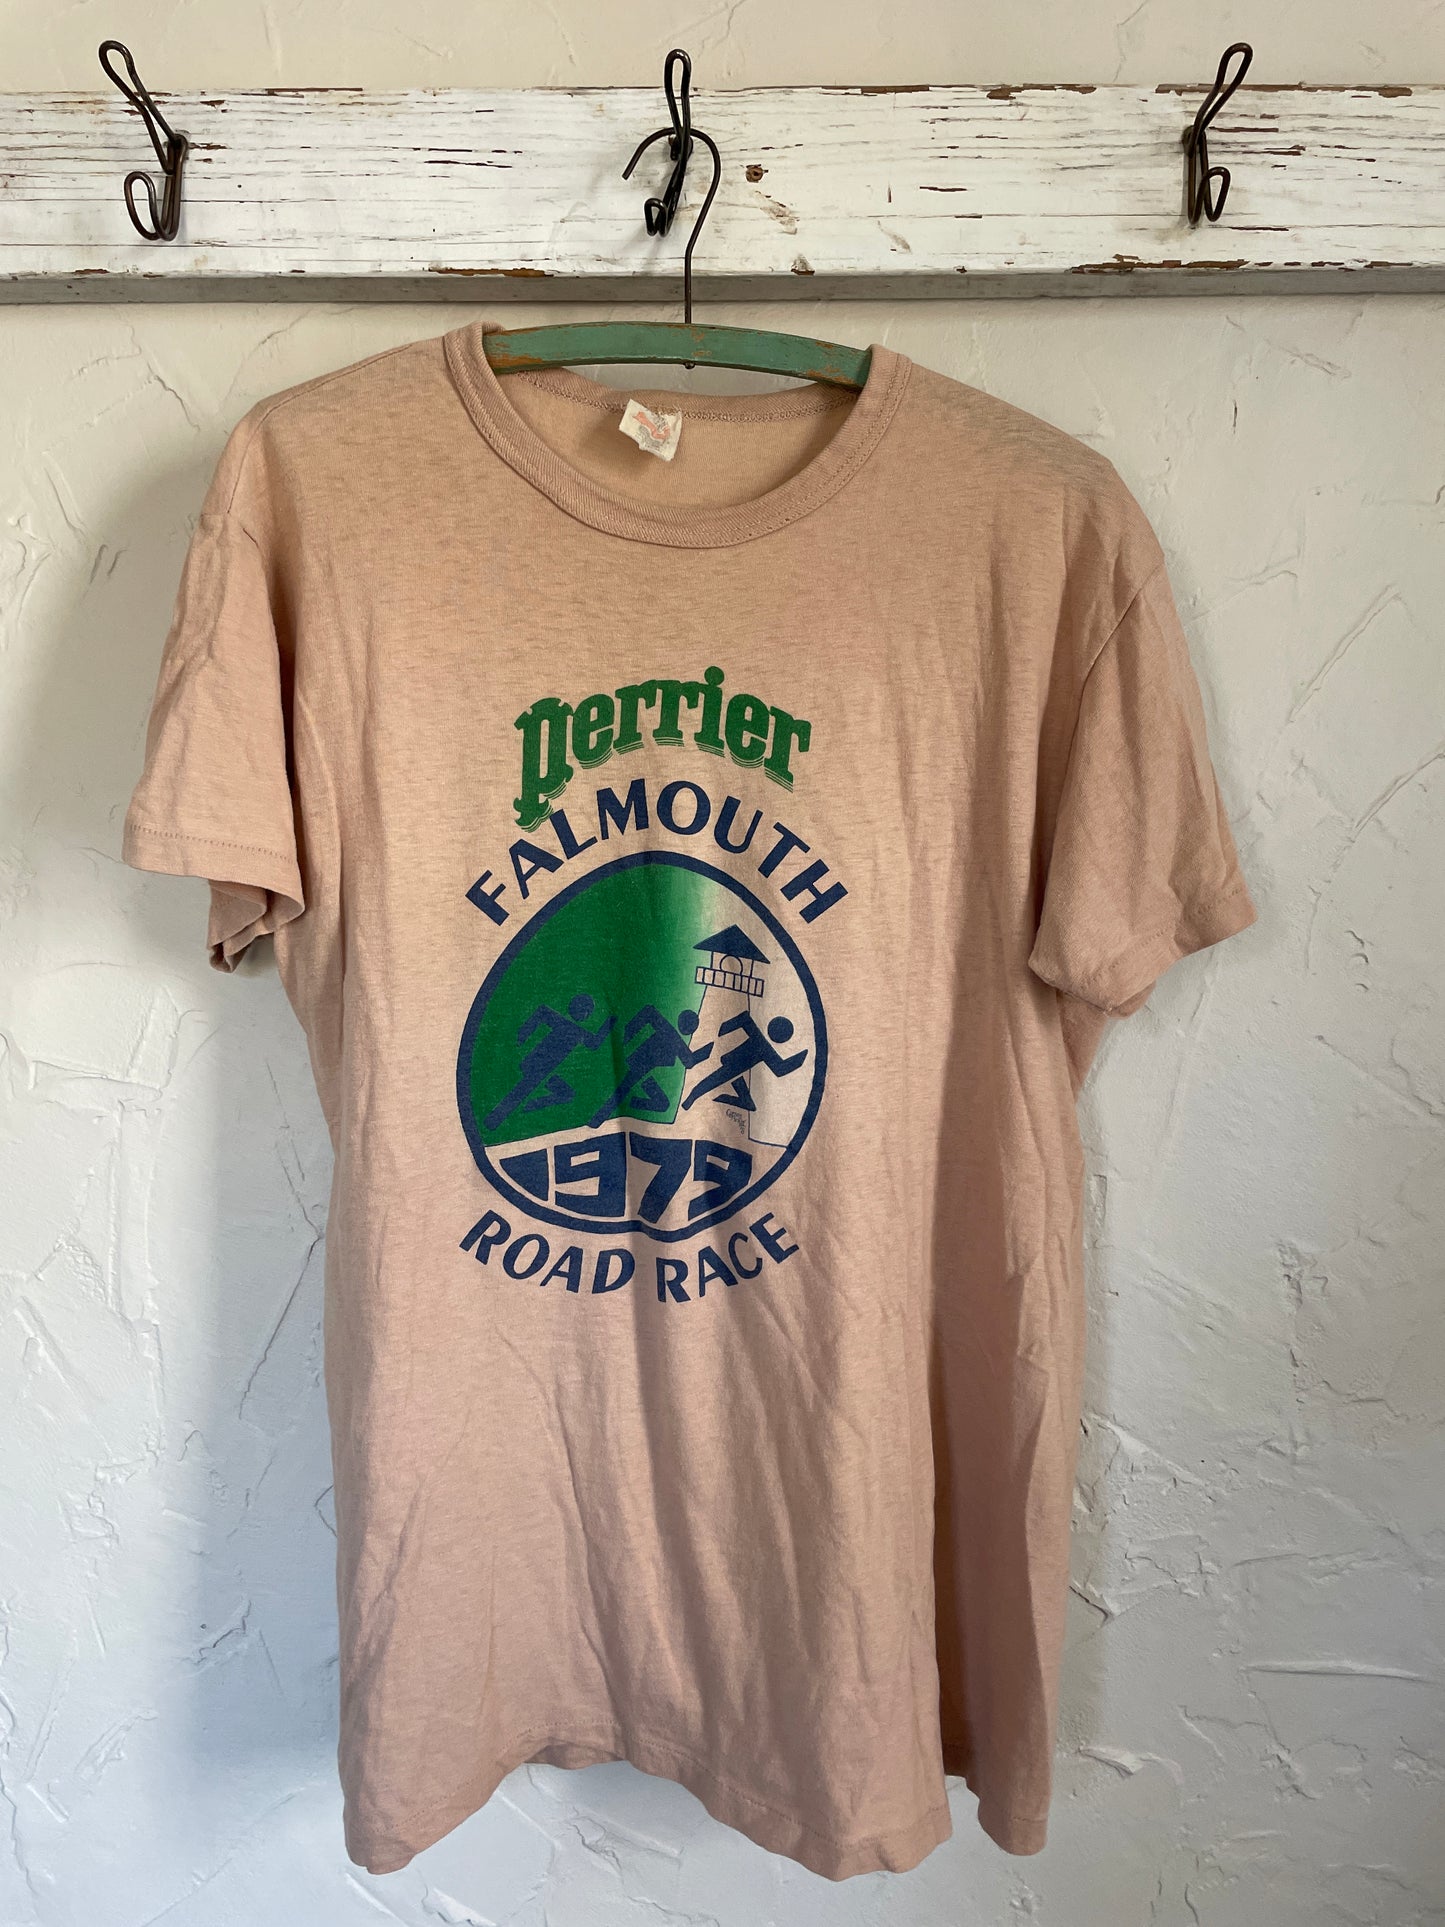 70s Perrier Falmouth Road Race Tee